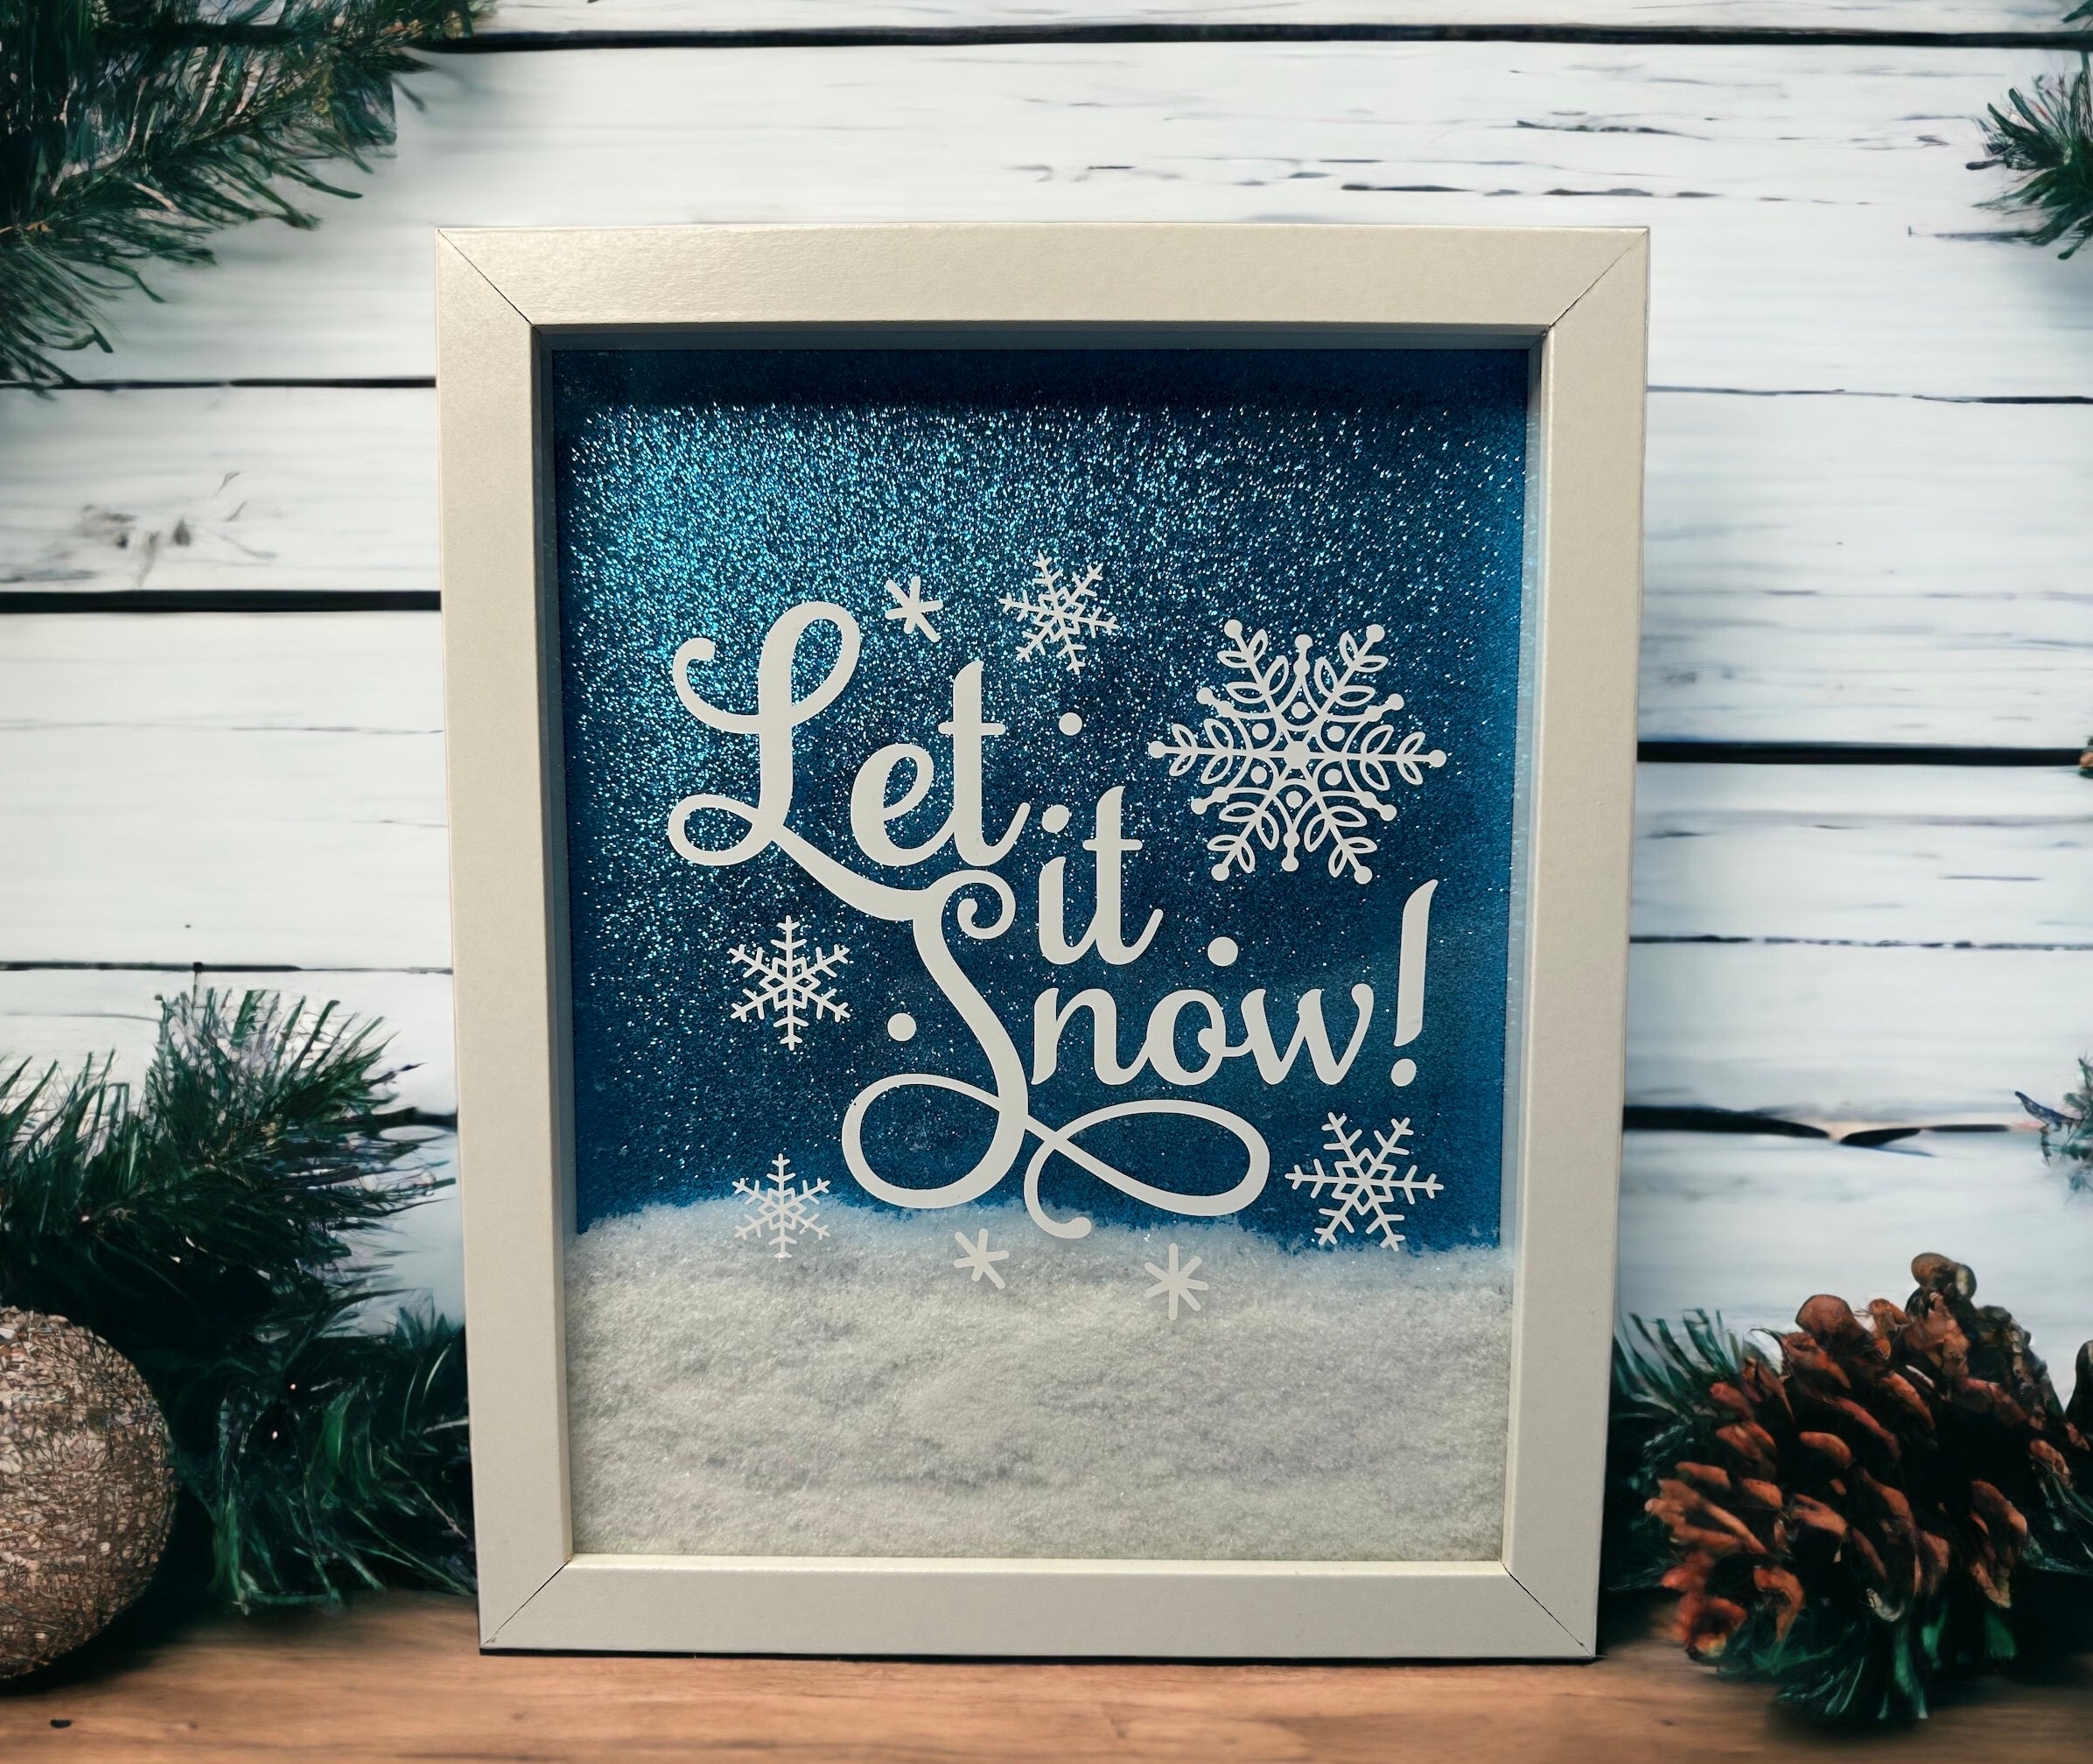 Let it Snow Instant Snow Powder Slime - Premium Artificial Fake Snow Slime  Supplies - Made in The USA Non-Toxic Safe - Instant Snow Cloud Slime Snow  Decorations - Mix Makes 5 Gallons